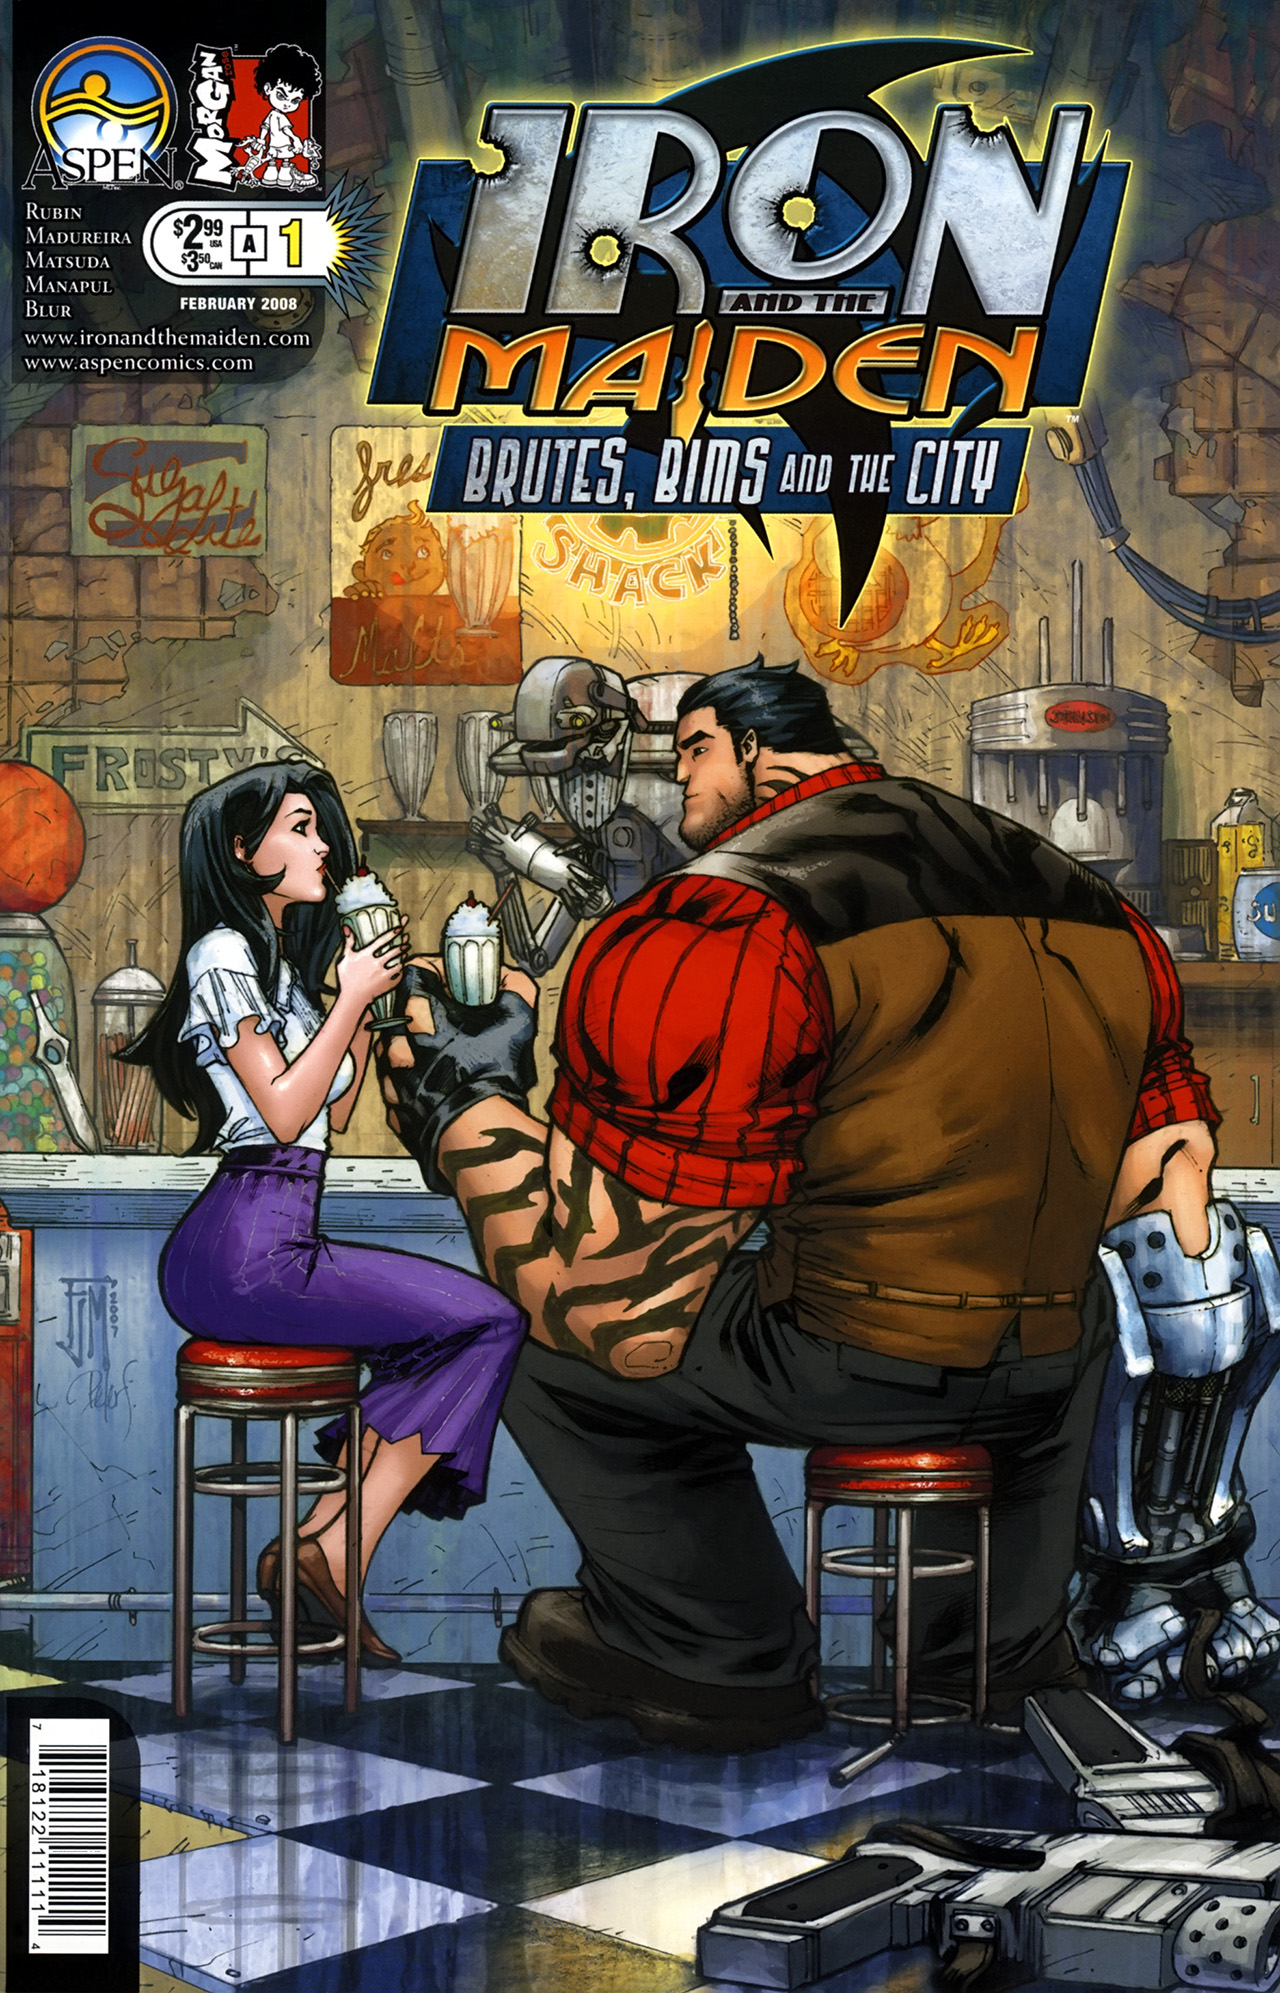 Read online Iron and the Maiden: Brutes, Bims and the City comic -  Issue # Full - 1